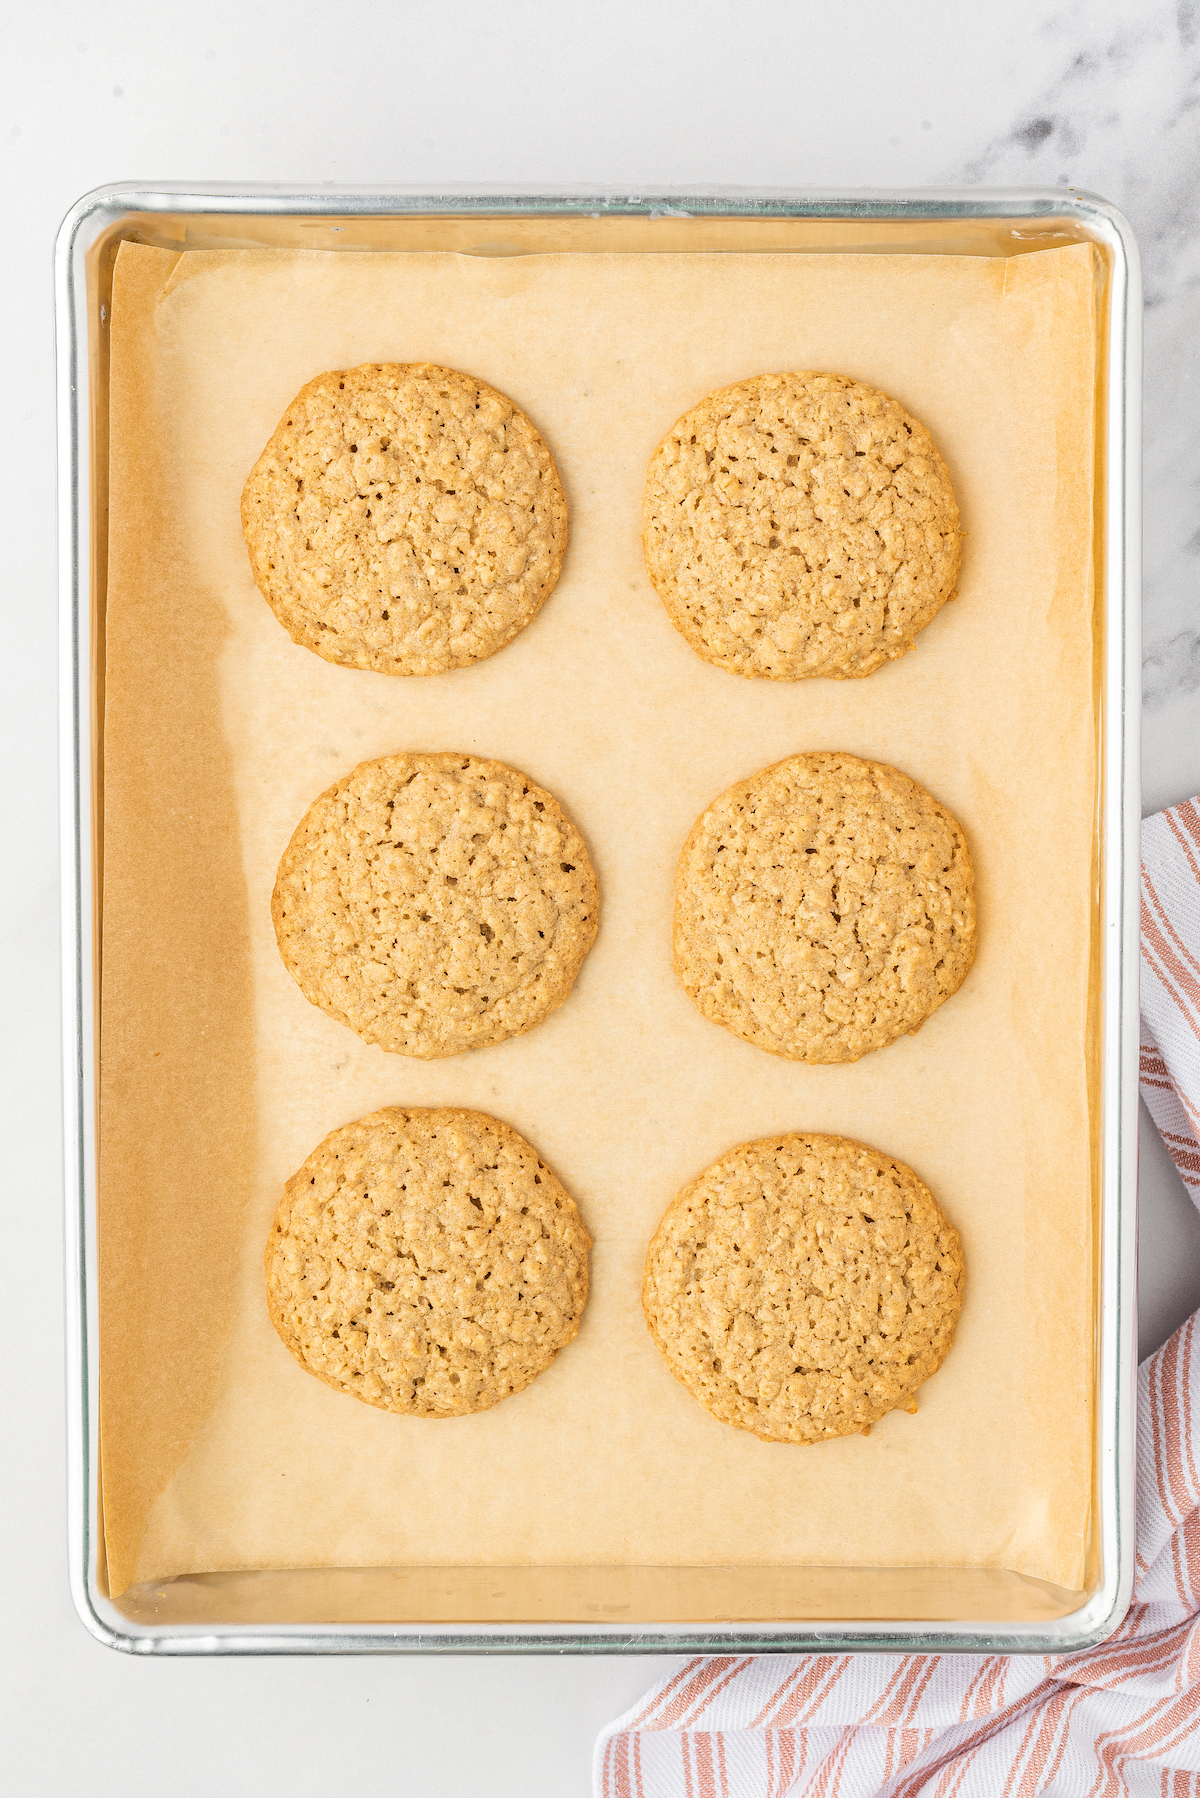 Baked old fashioned oatmeal cookies on a baking sheet.